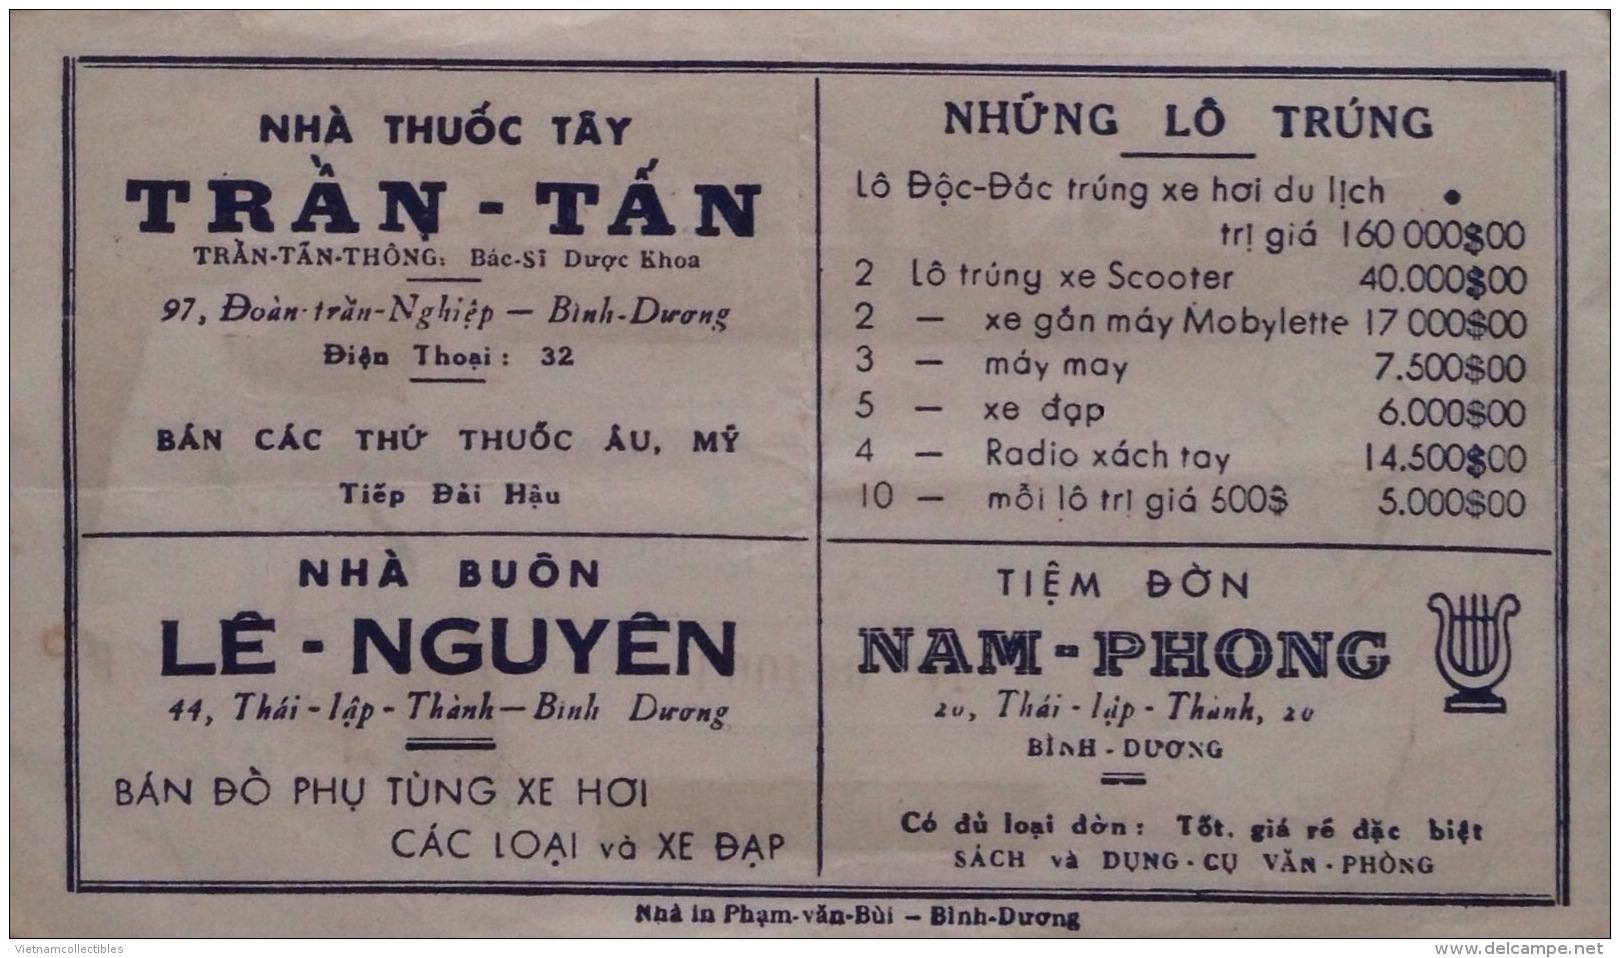 Lotterie / Lottery Of South Vietnam Viet Nam Issued By Binh Duong 1959 - RARE / 02 Images - Lottery Tickets